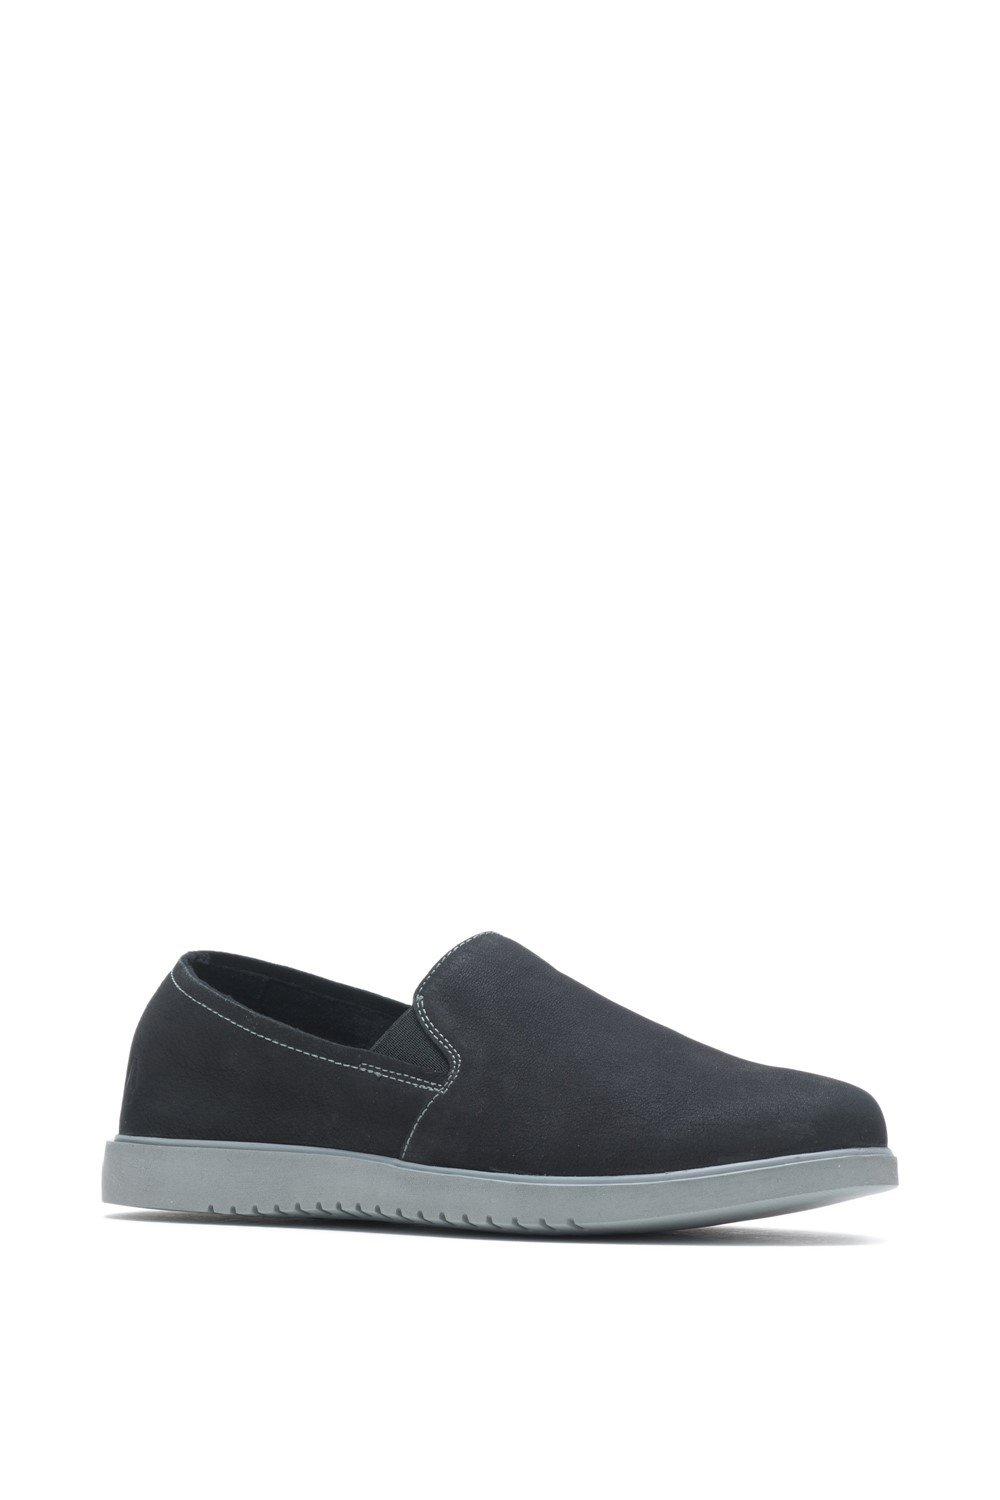 'Everyday' Smooth Leather Slip On Shoes